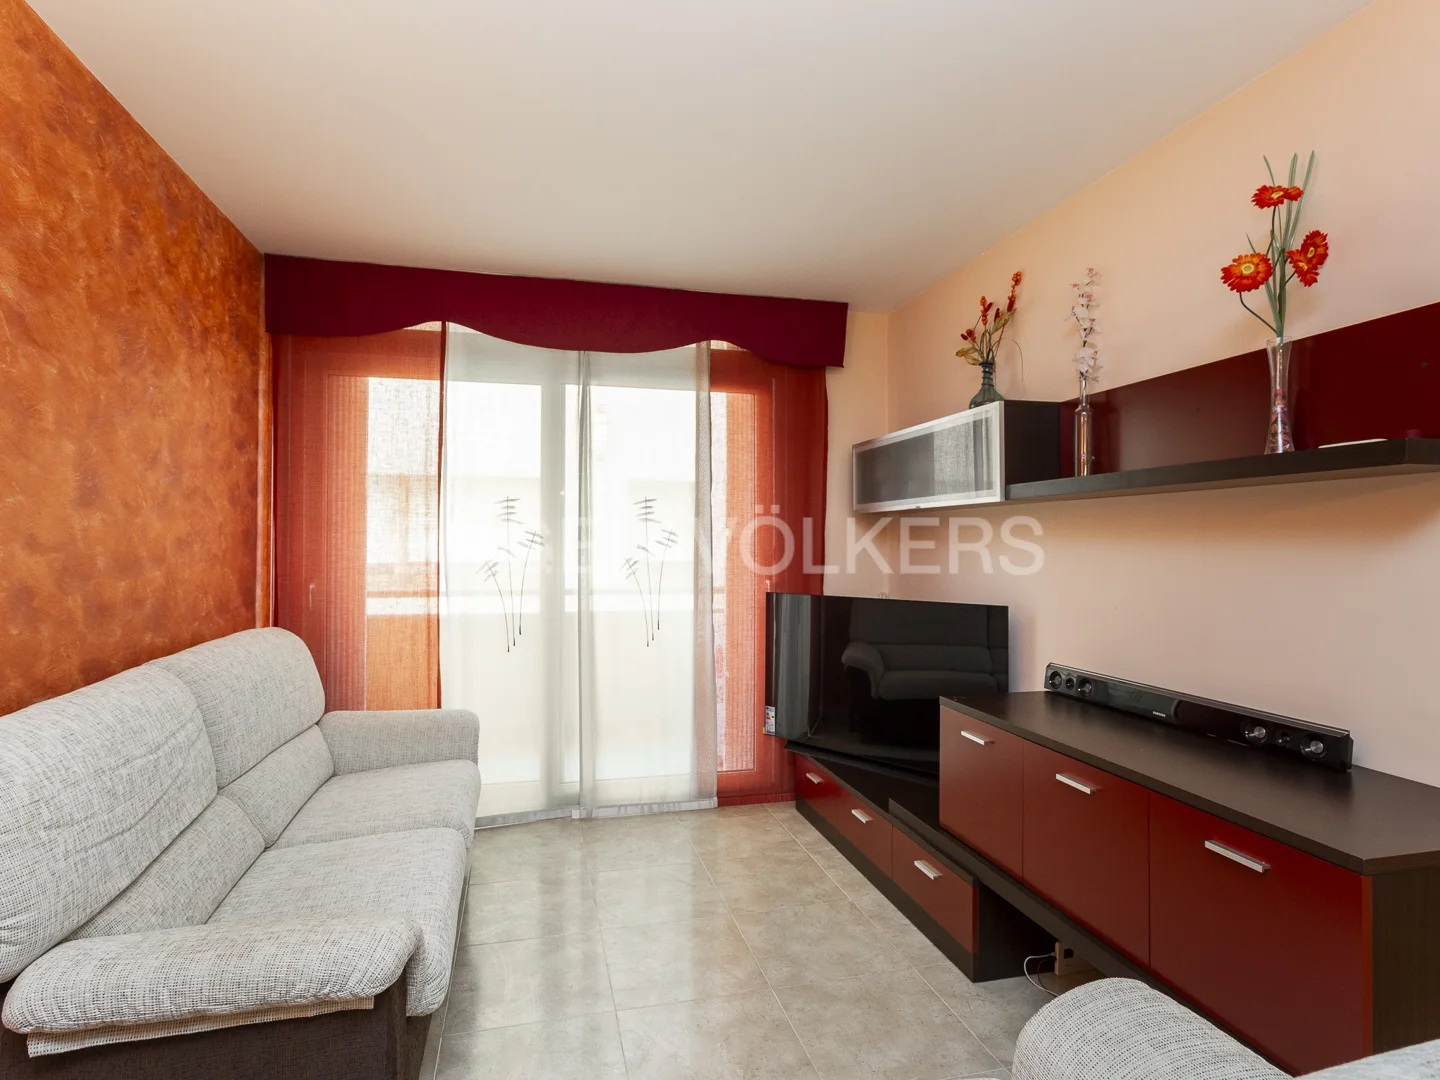 Flat with lift and parking in Avinyó Nou